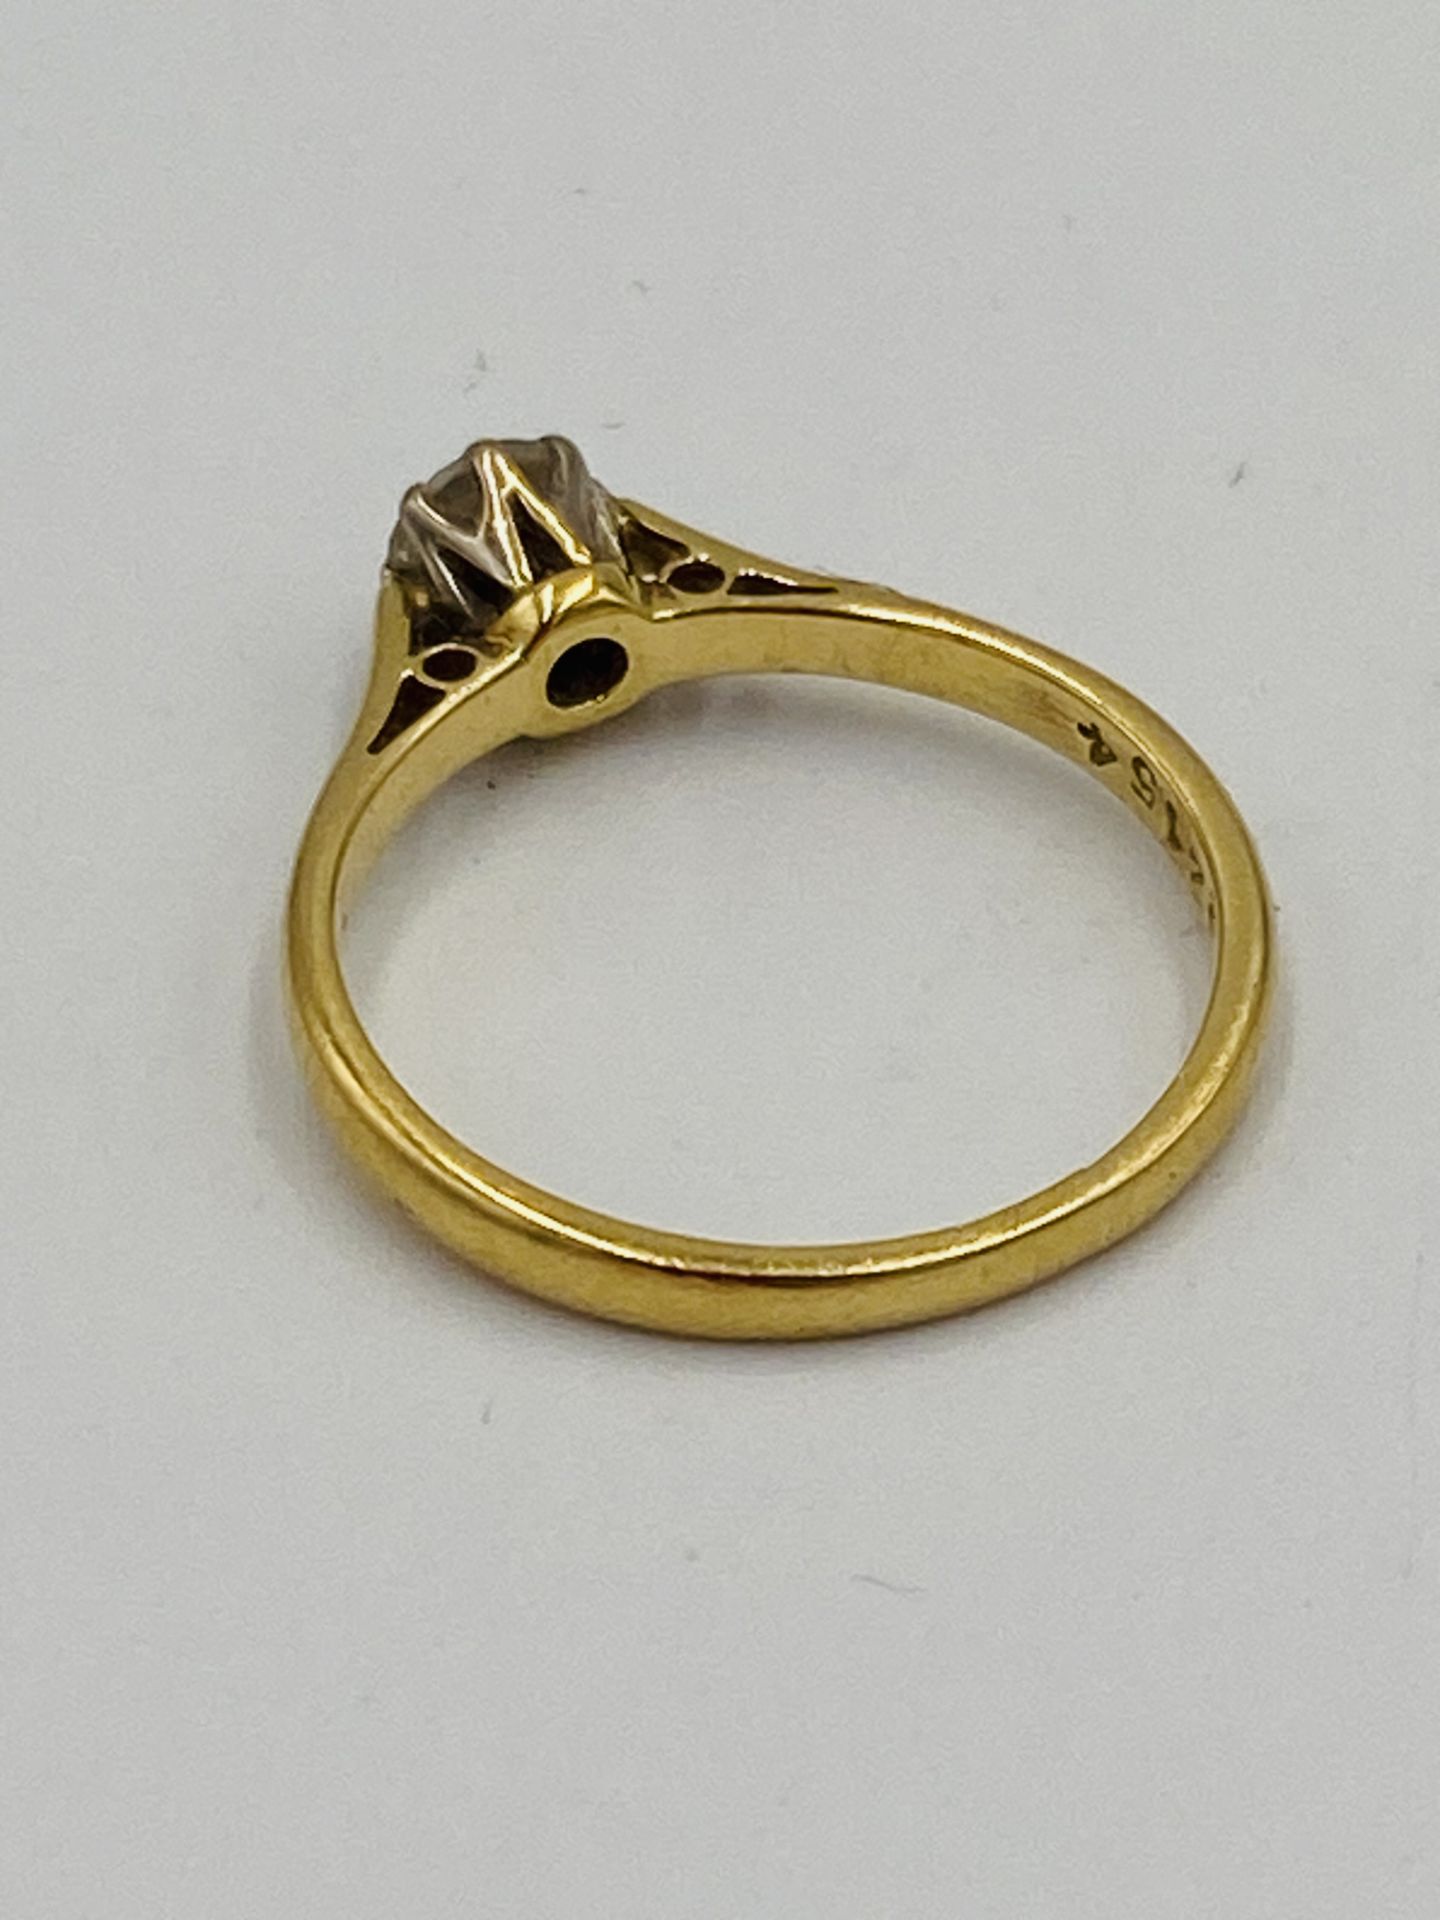 18ct gold solitaire ring - Image 6 of 6